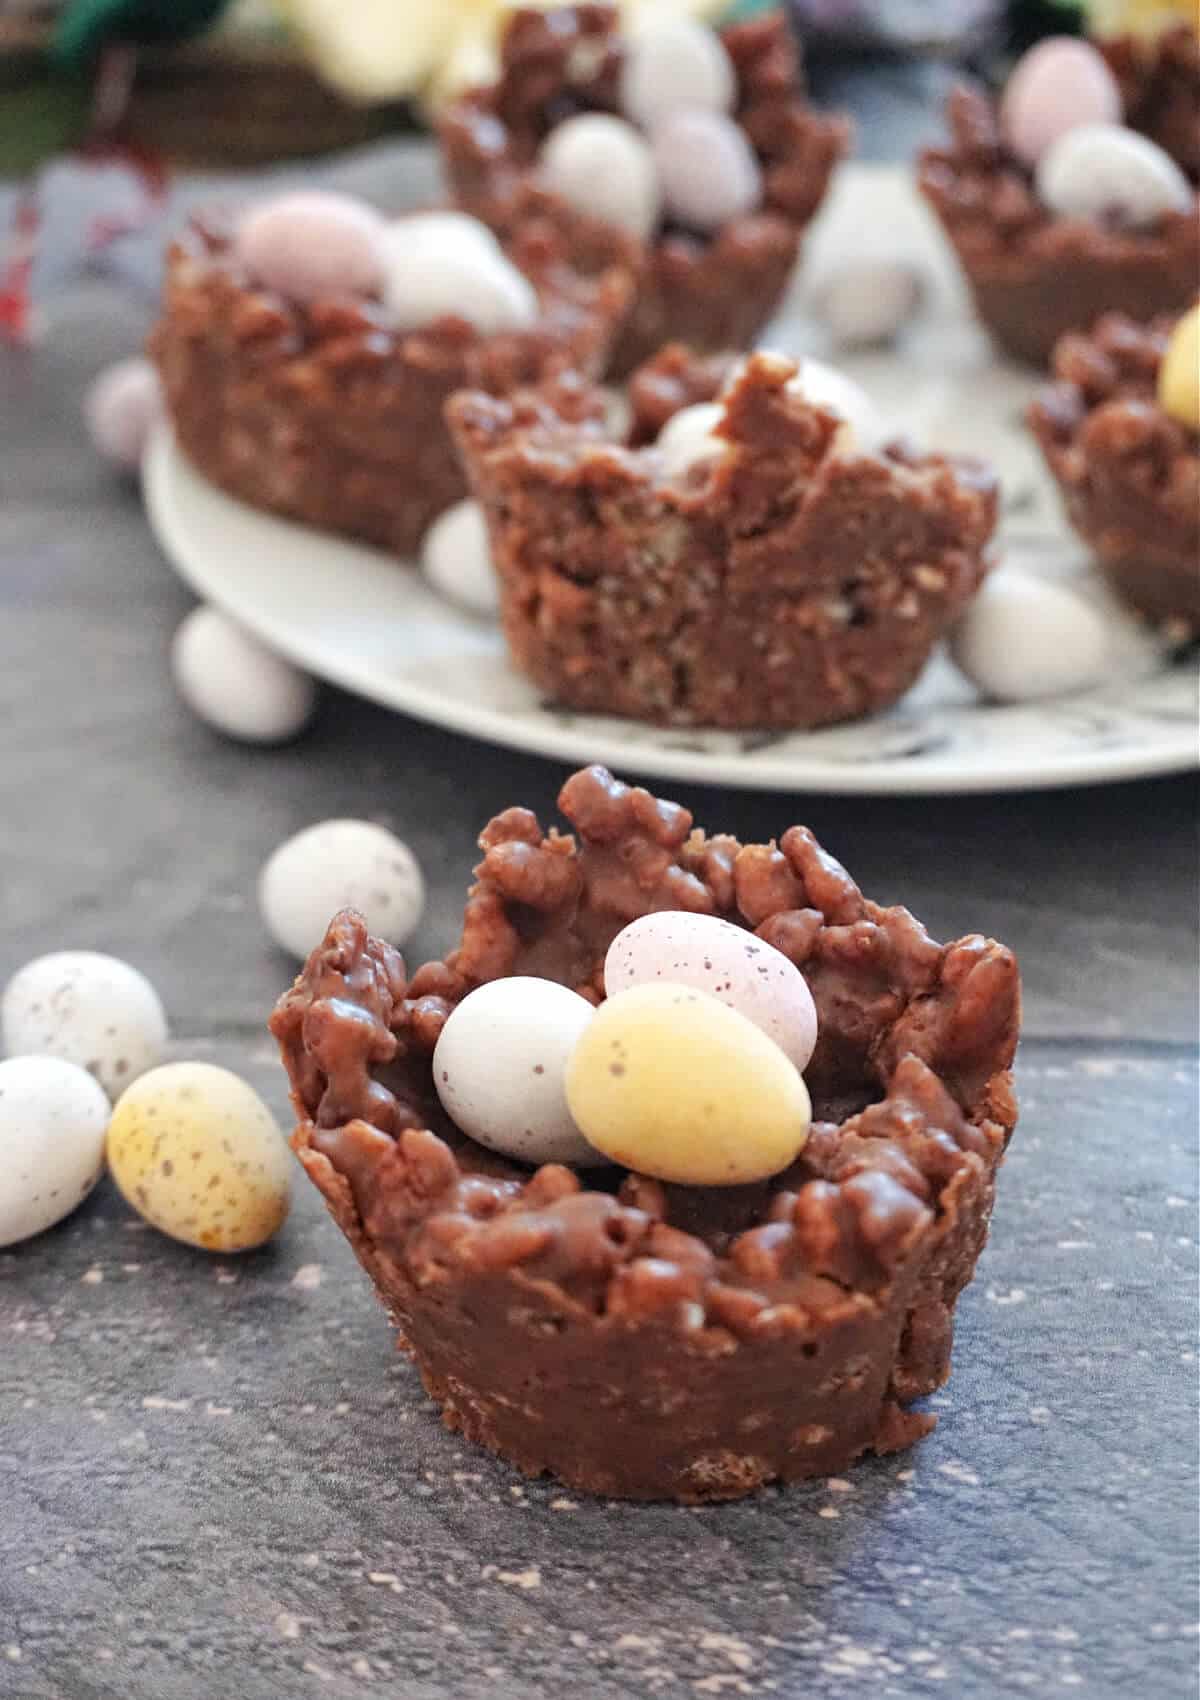 Close-up shot of a chocolate rice krispie nest filled with 3 mini chocolate eggs and a white plate with more nests in the background.